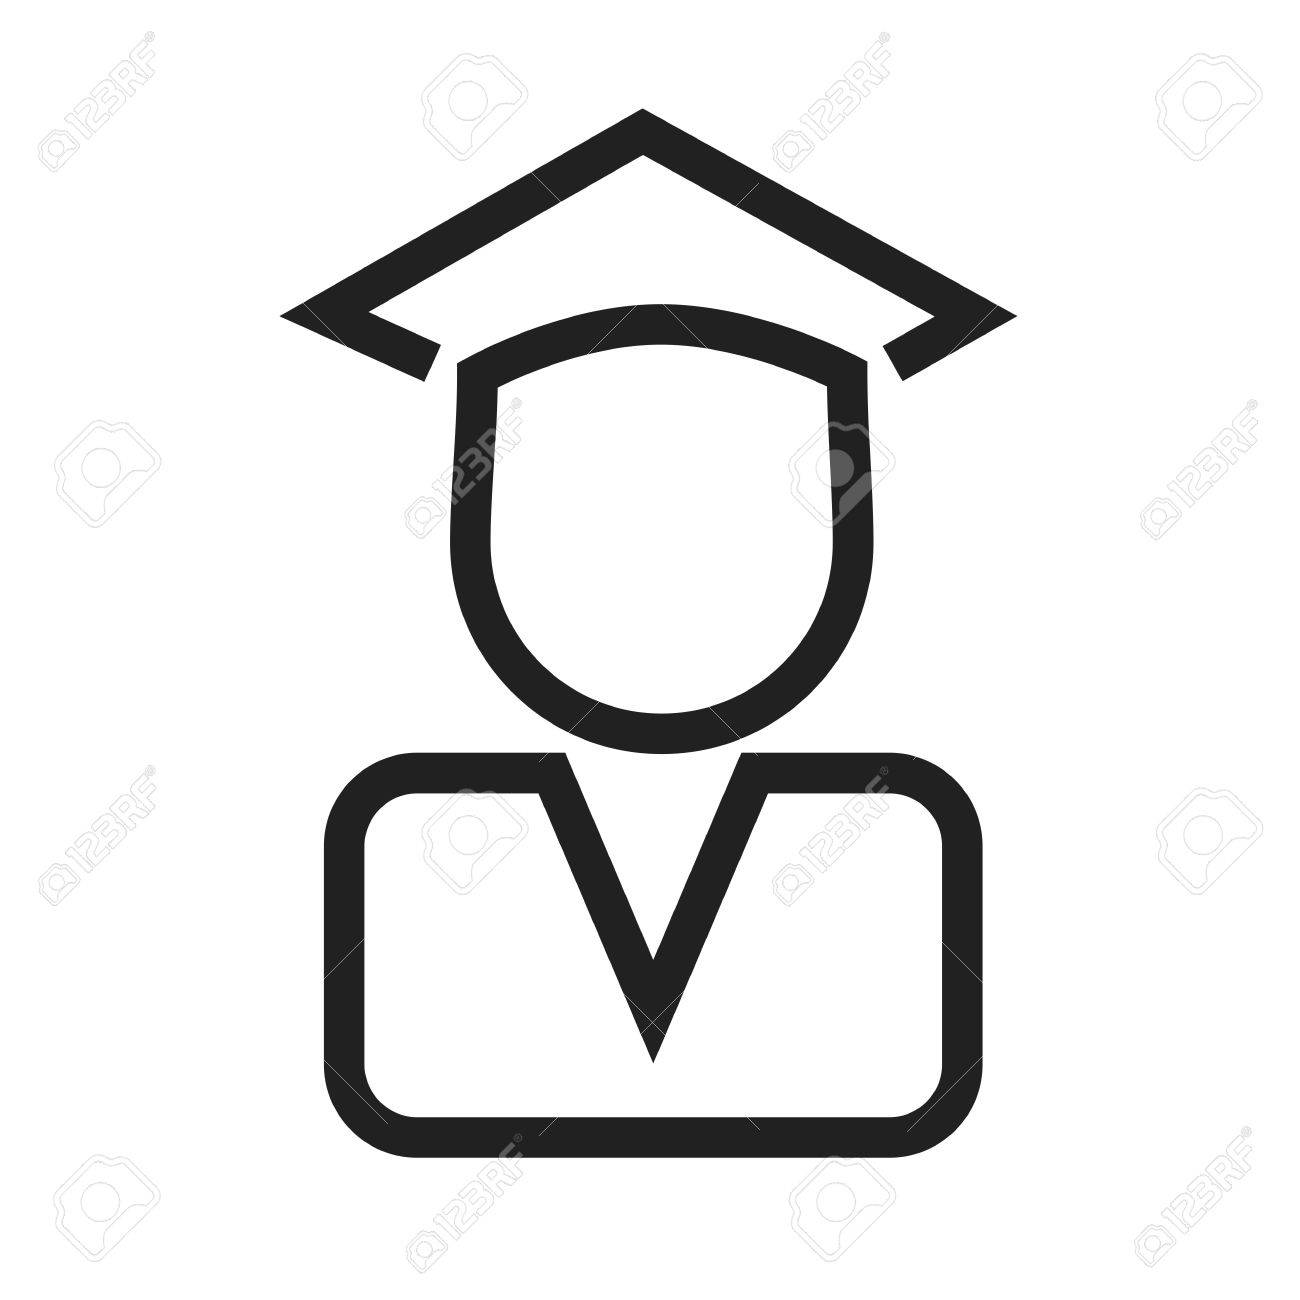 Diploma Icon Flat Graphic Design Stock Vector Art  More Images of 